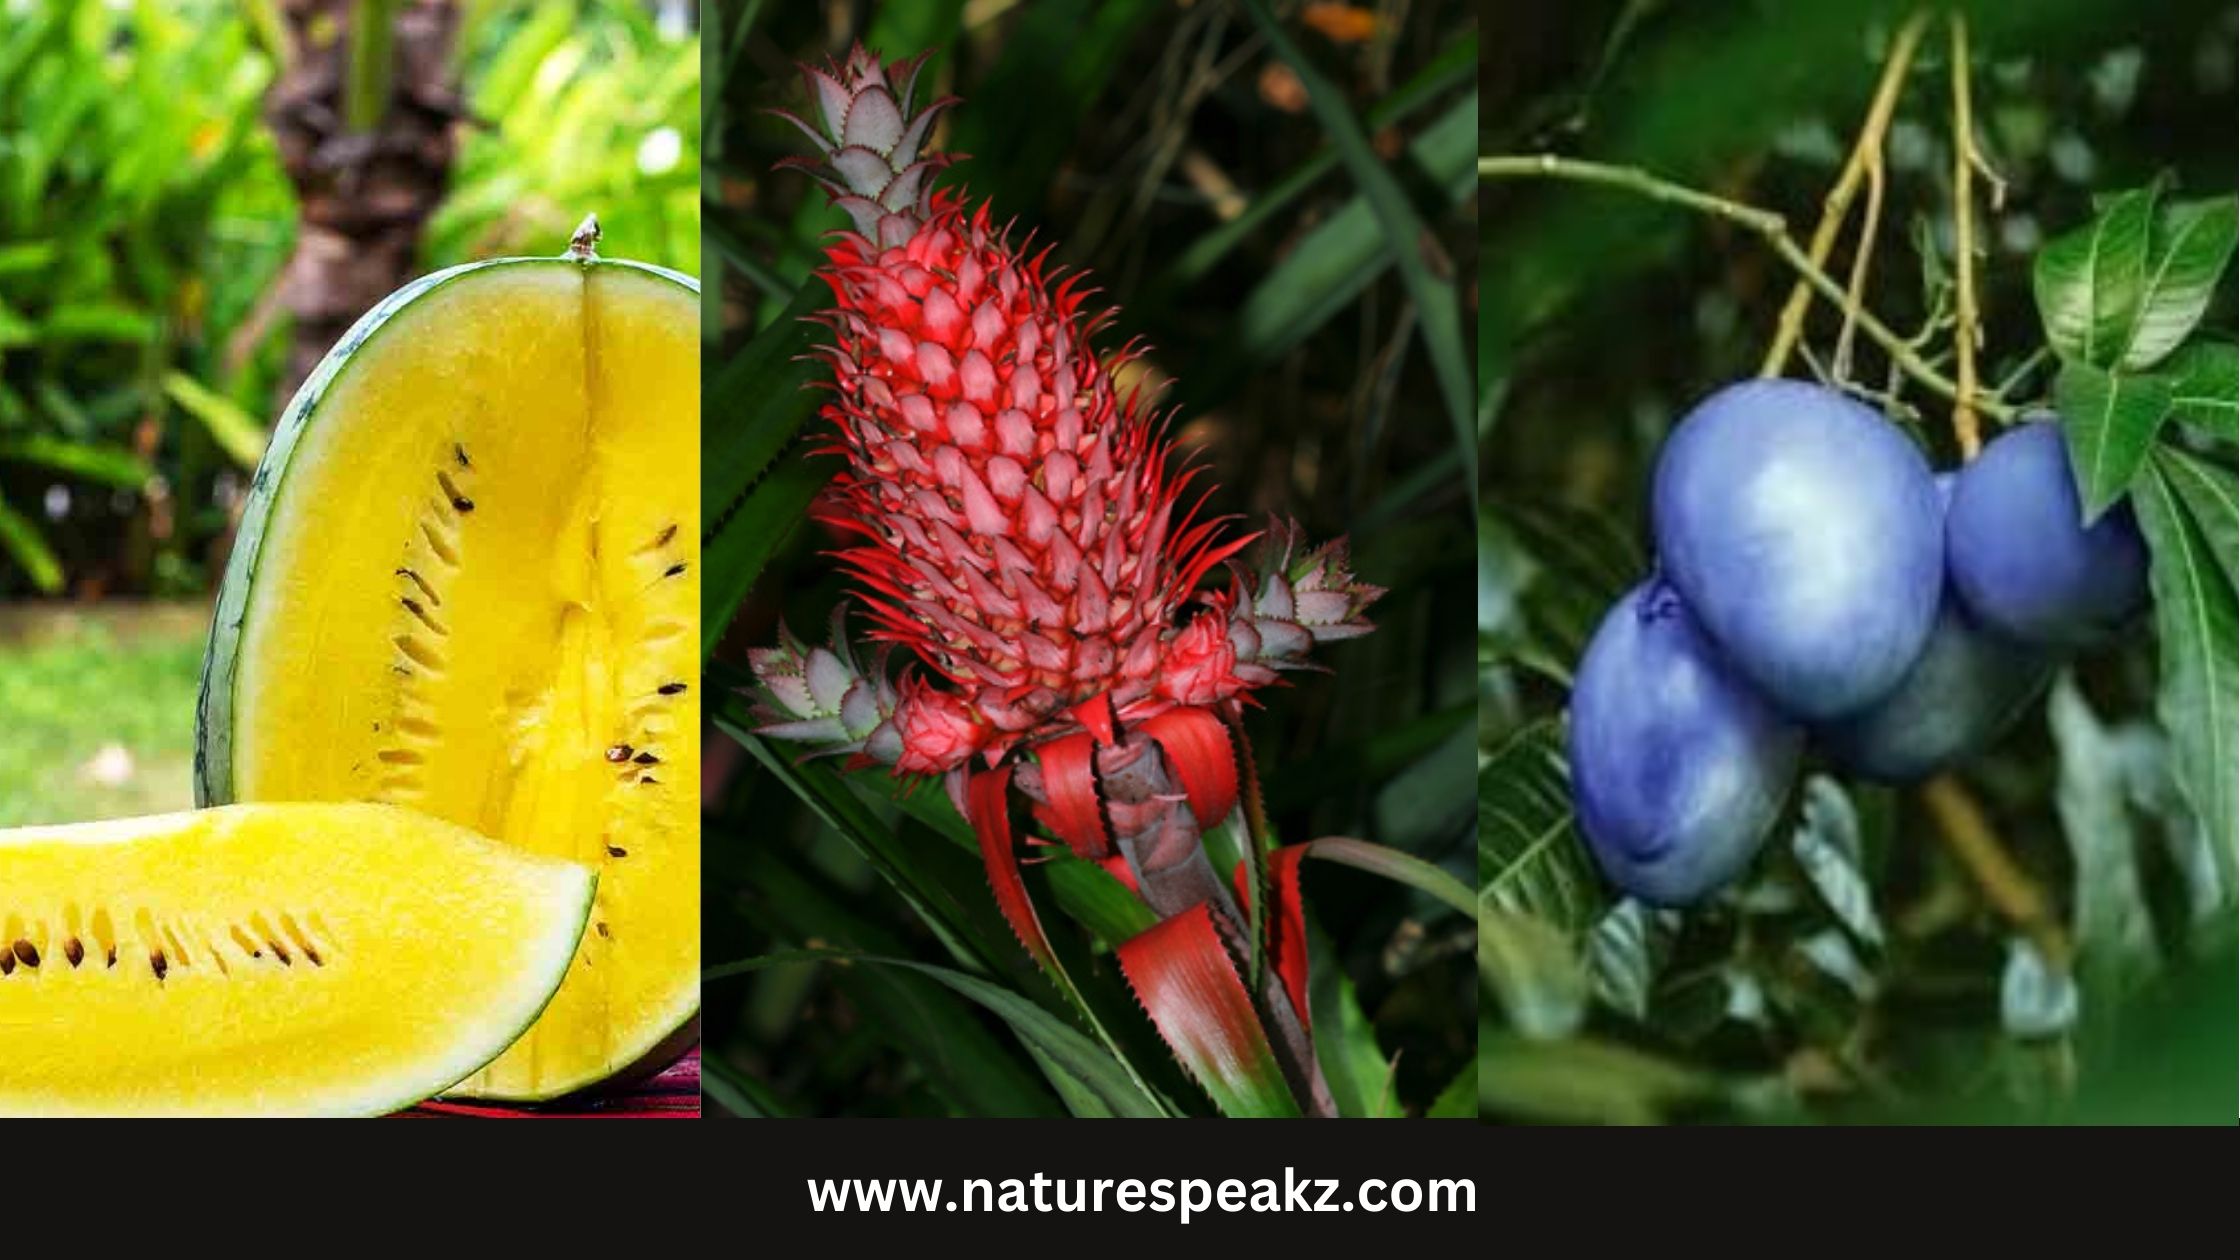 List of rare colored fruits found on earth